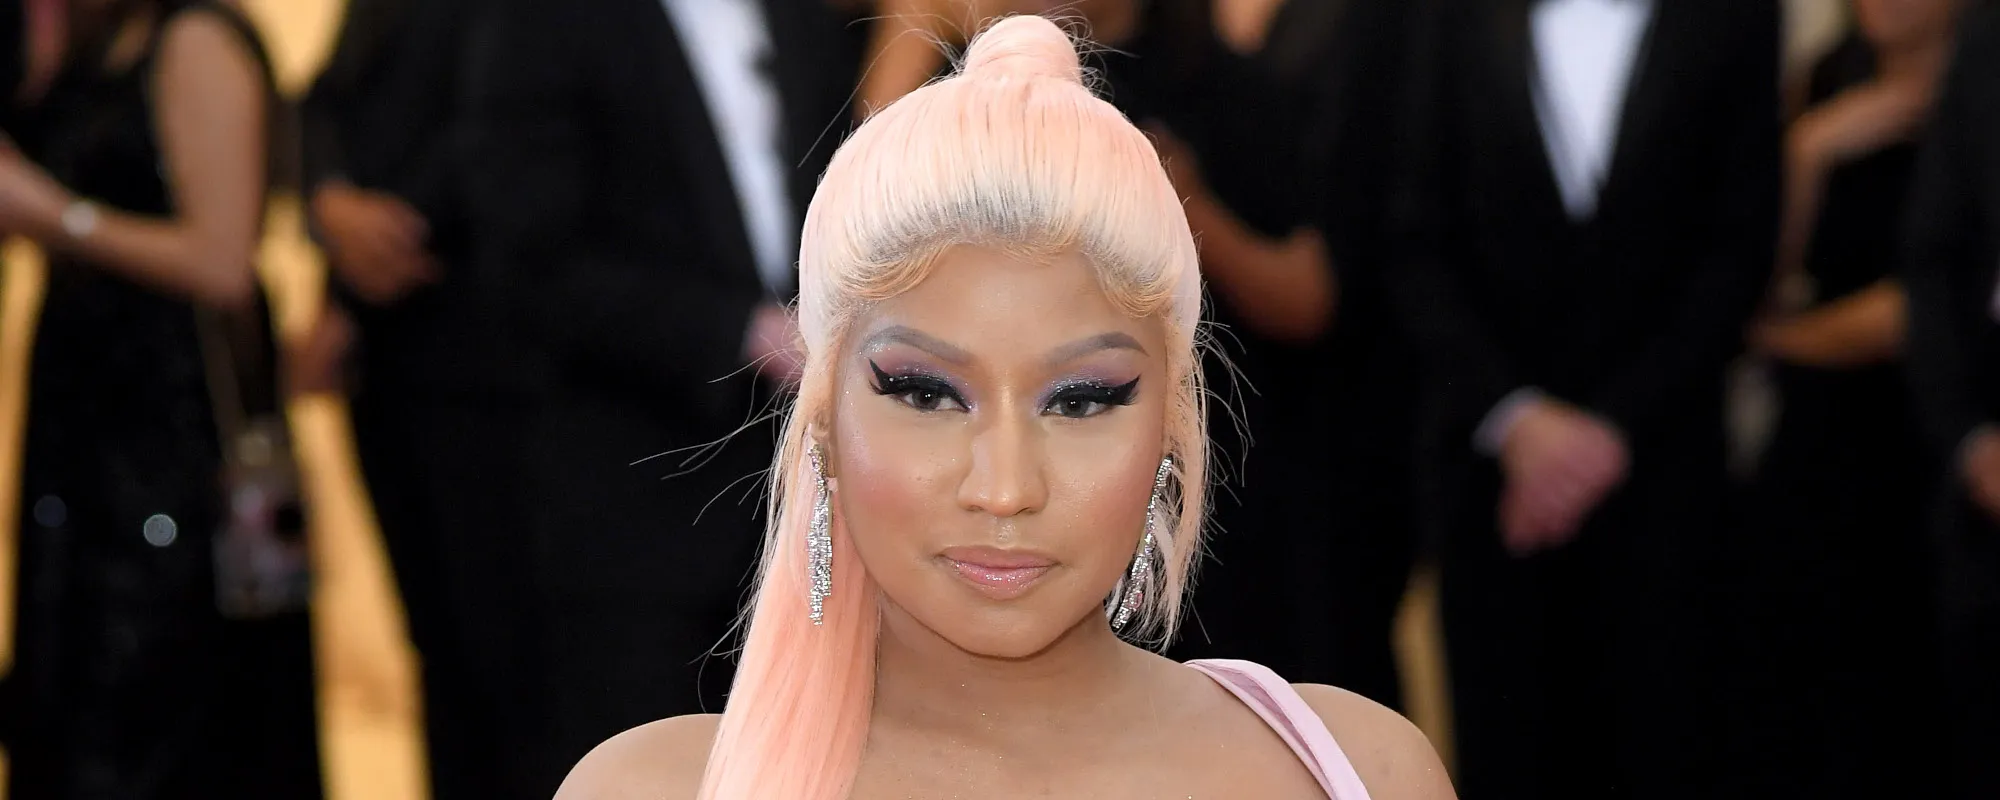 Nicki Minaj Unveils the Cover Art for ‘Pink Friday 2’